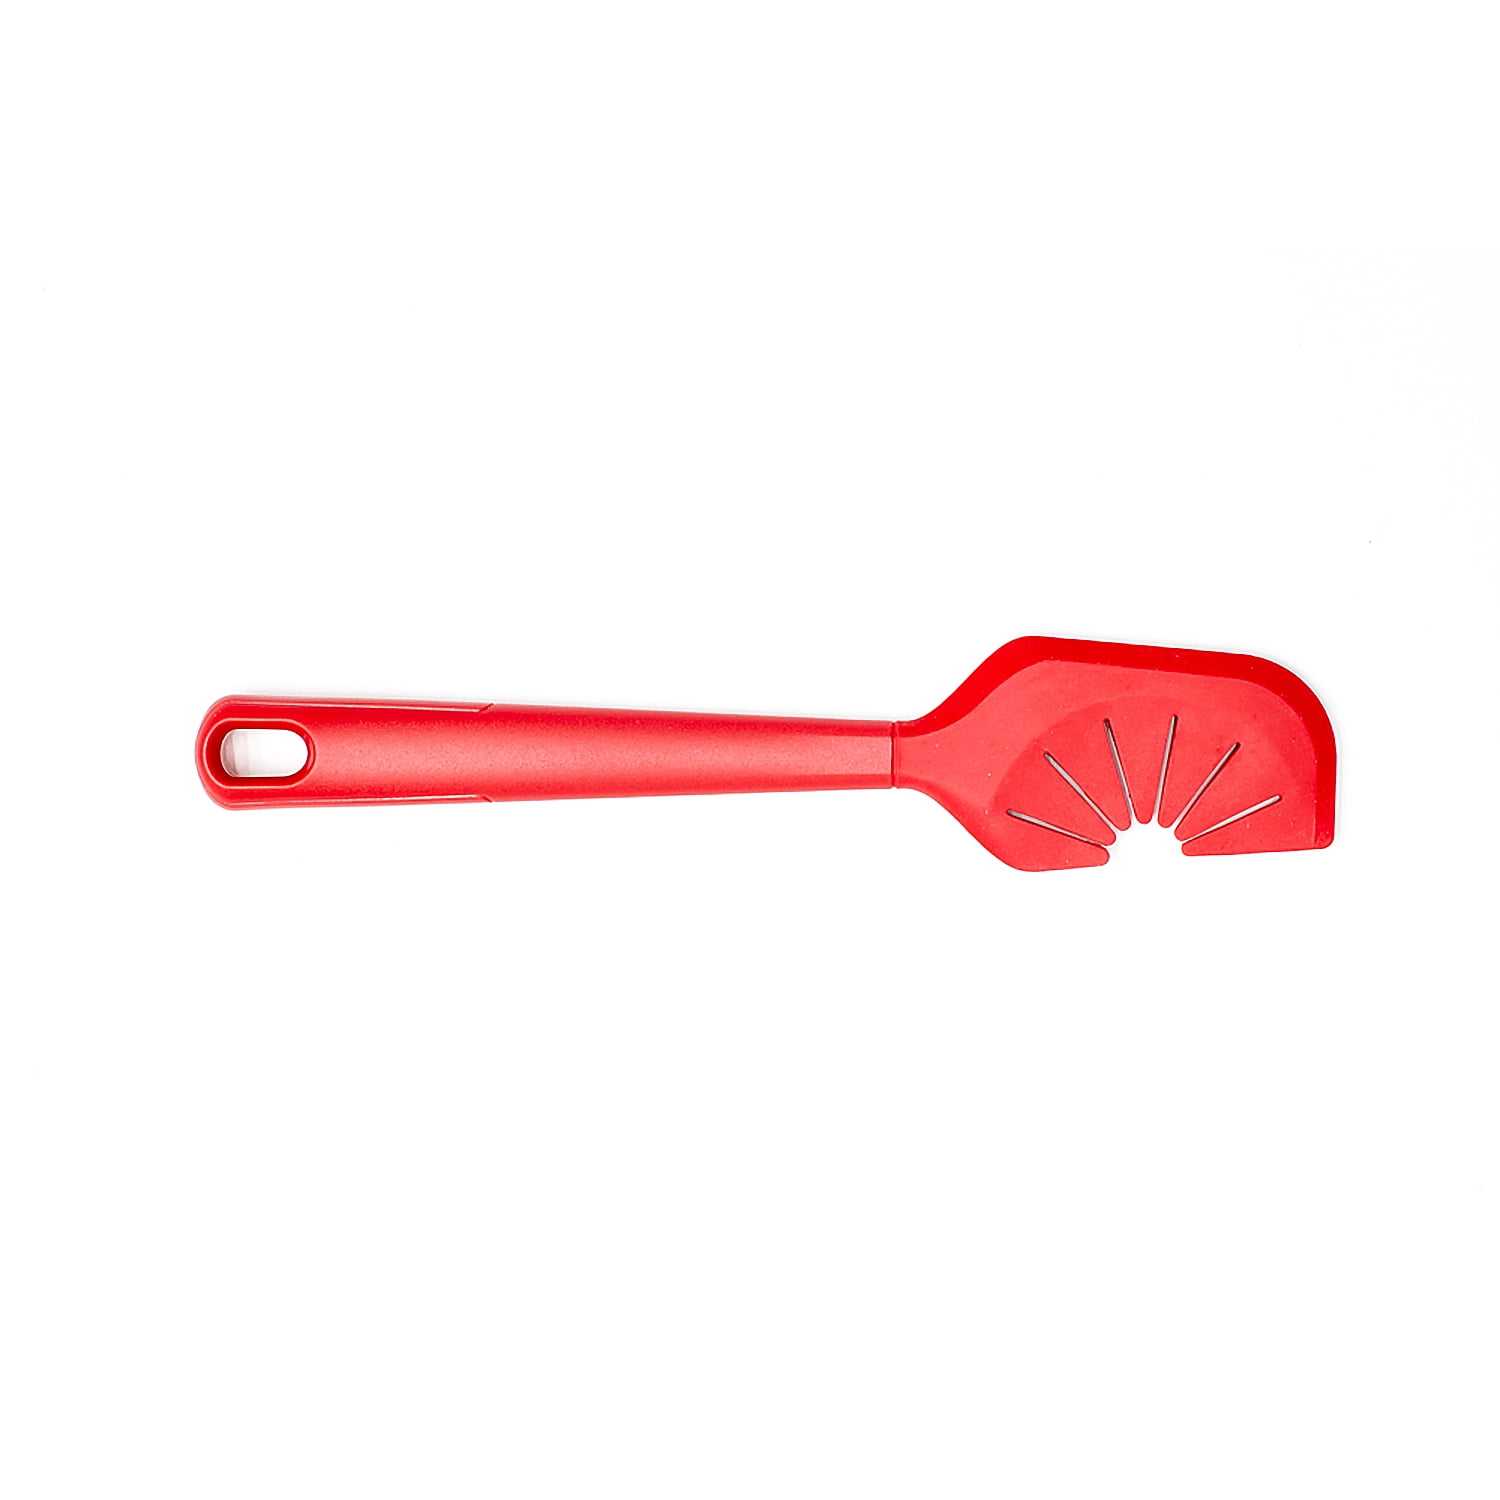  WISELADY One Piece Spatula Scraper For Scraping Mixing